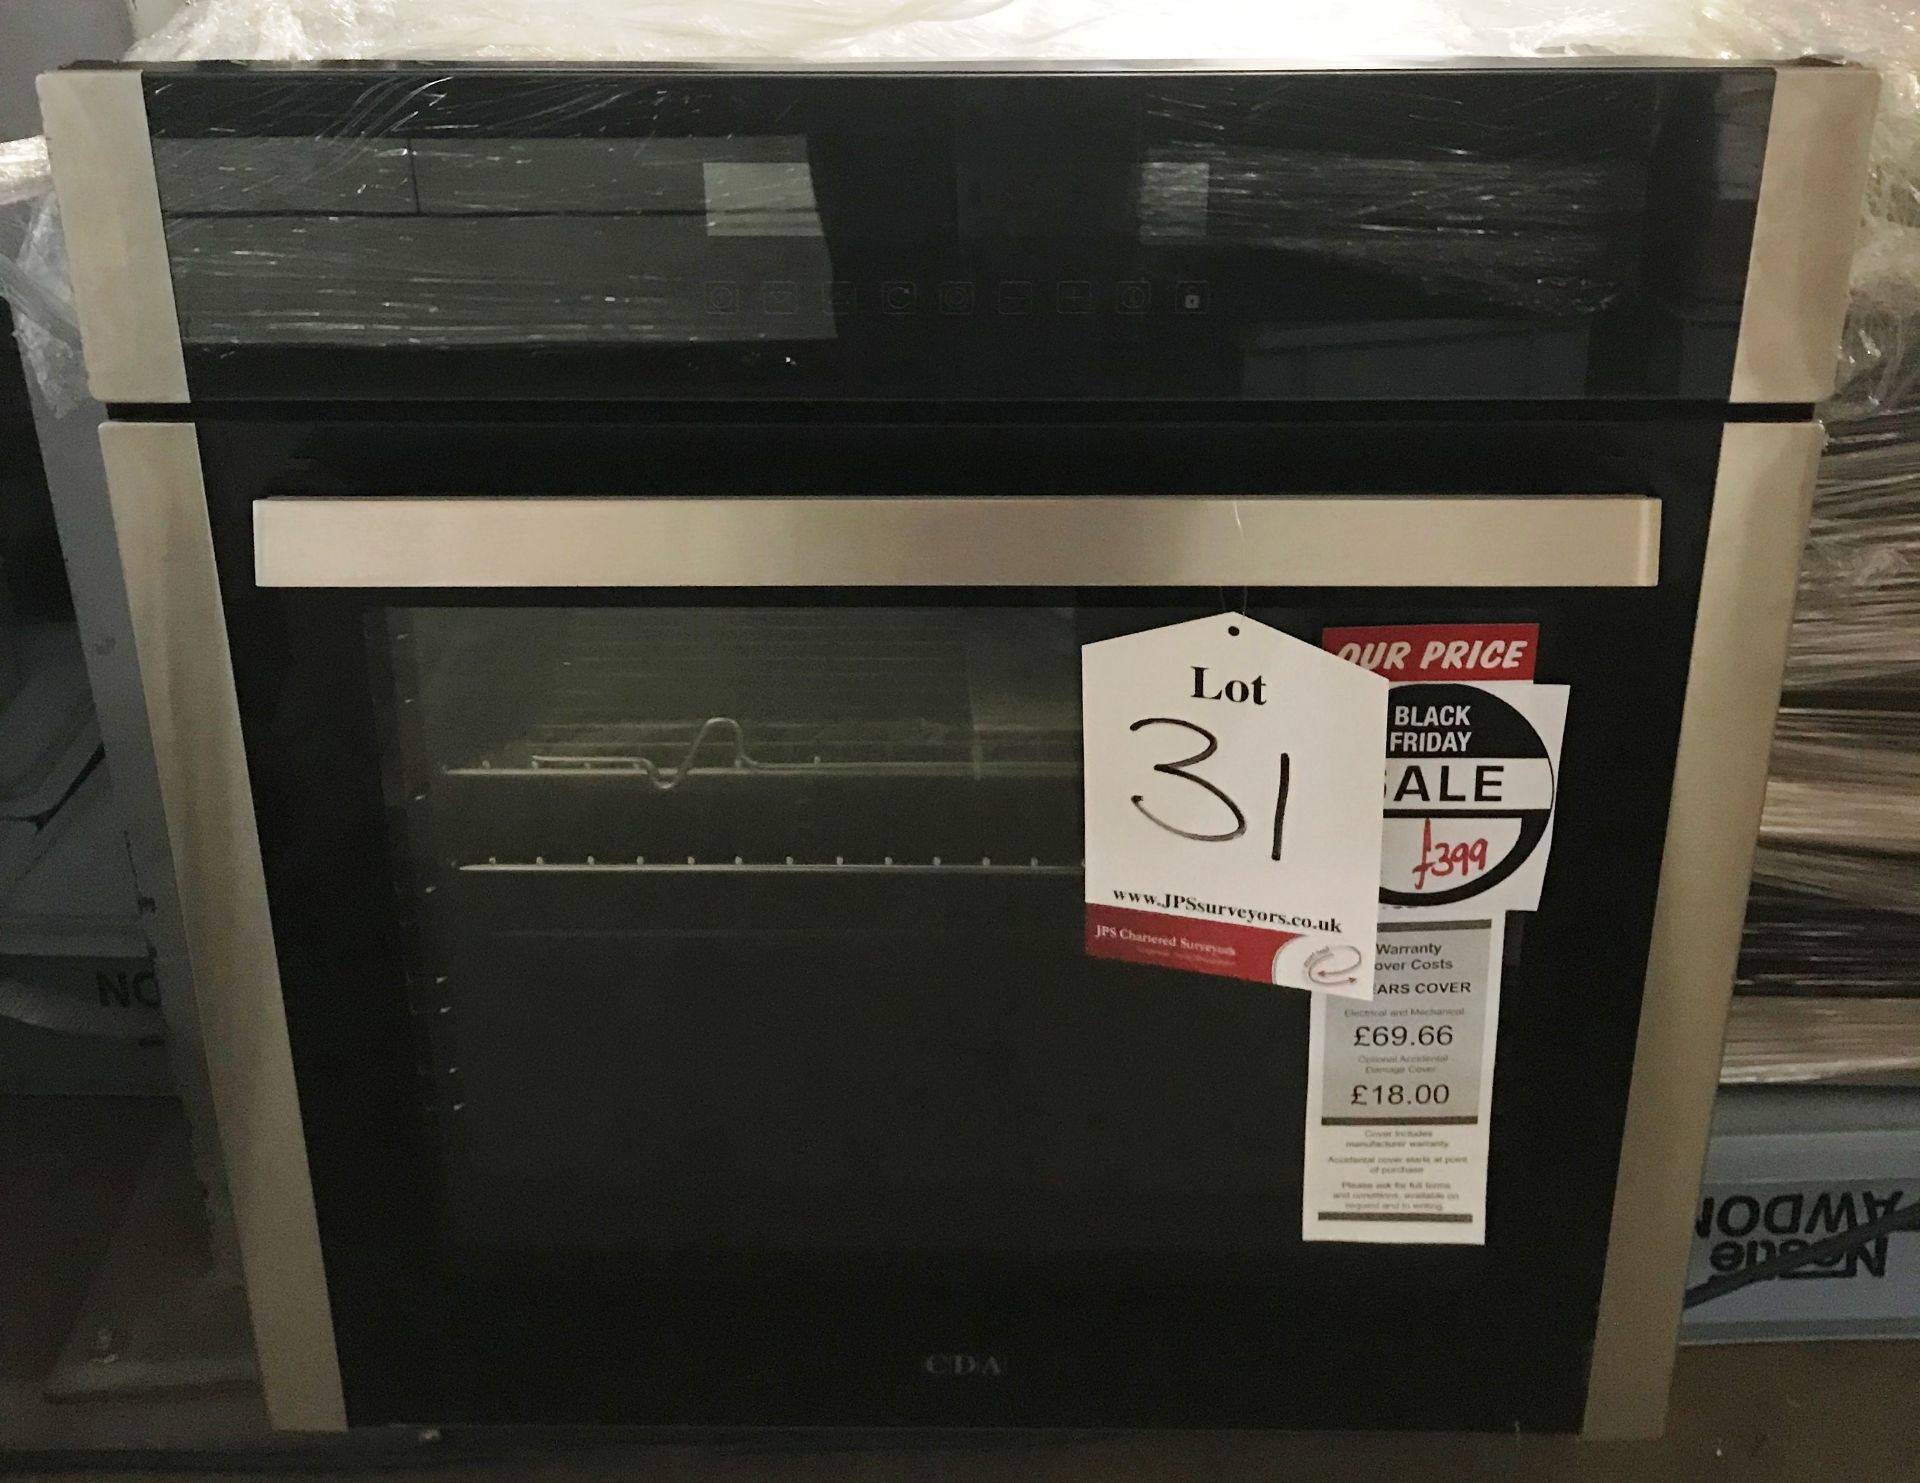 Ex Display CDA SK410SS Ten Function Electric Single Oven Stainless Steel - RRP£399